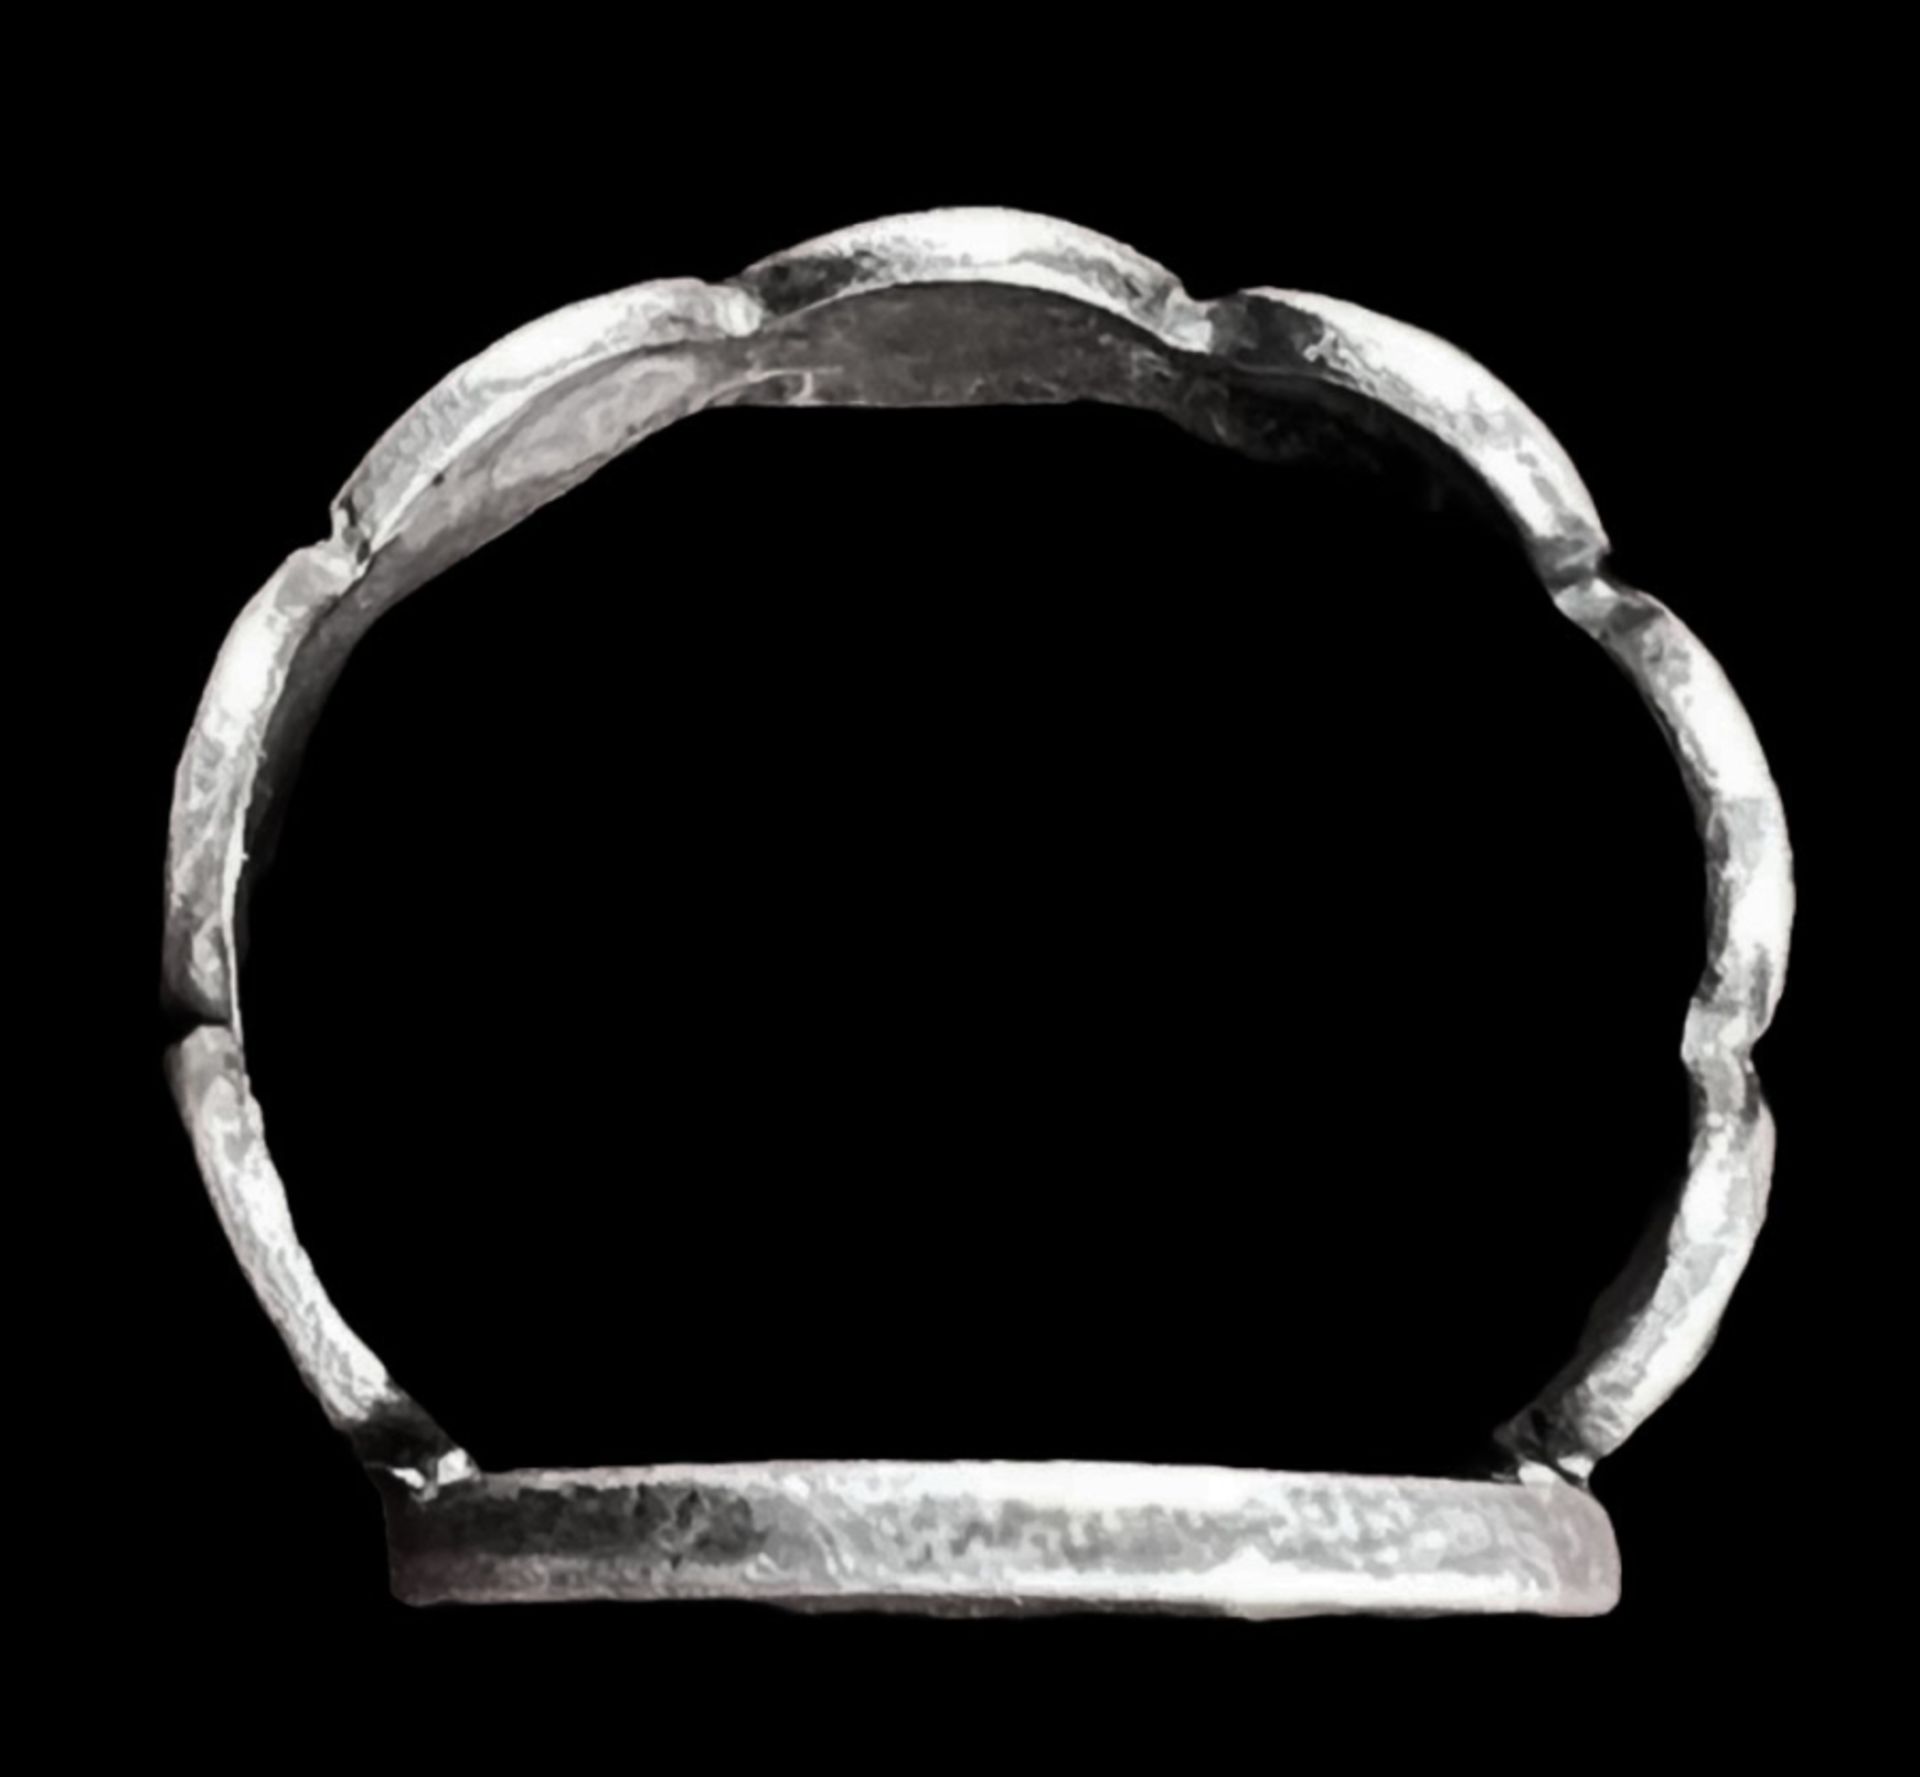 Silver ring with an engraving of a Menorah - Image 3 of 3